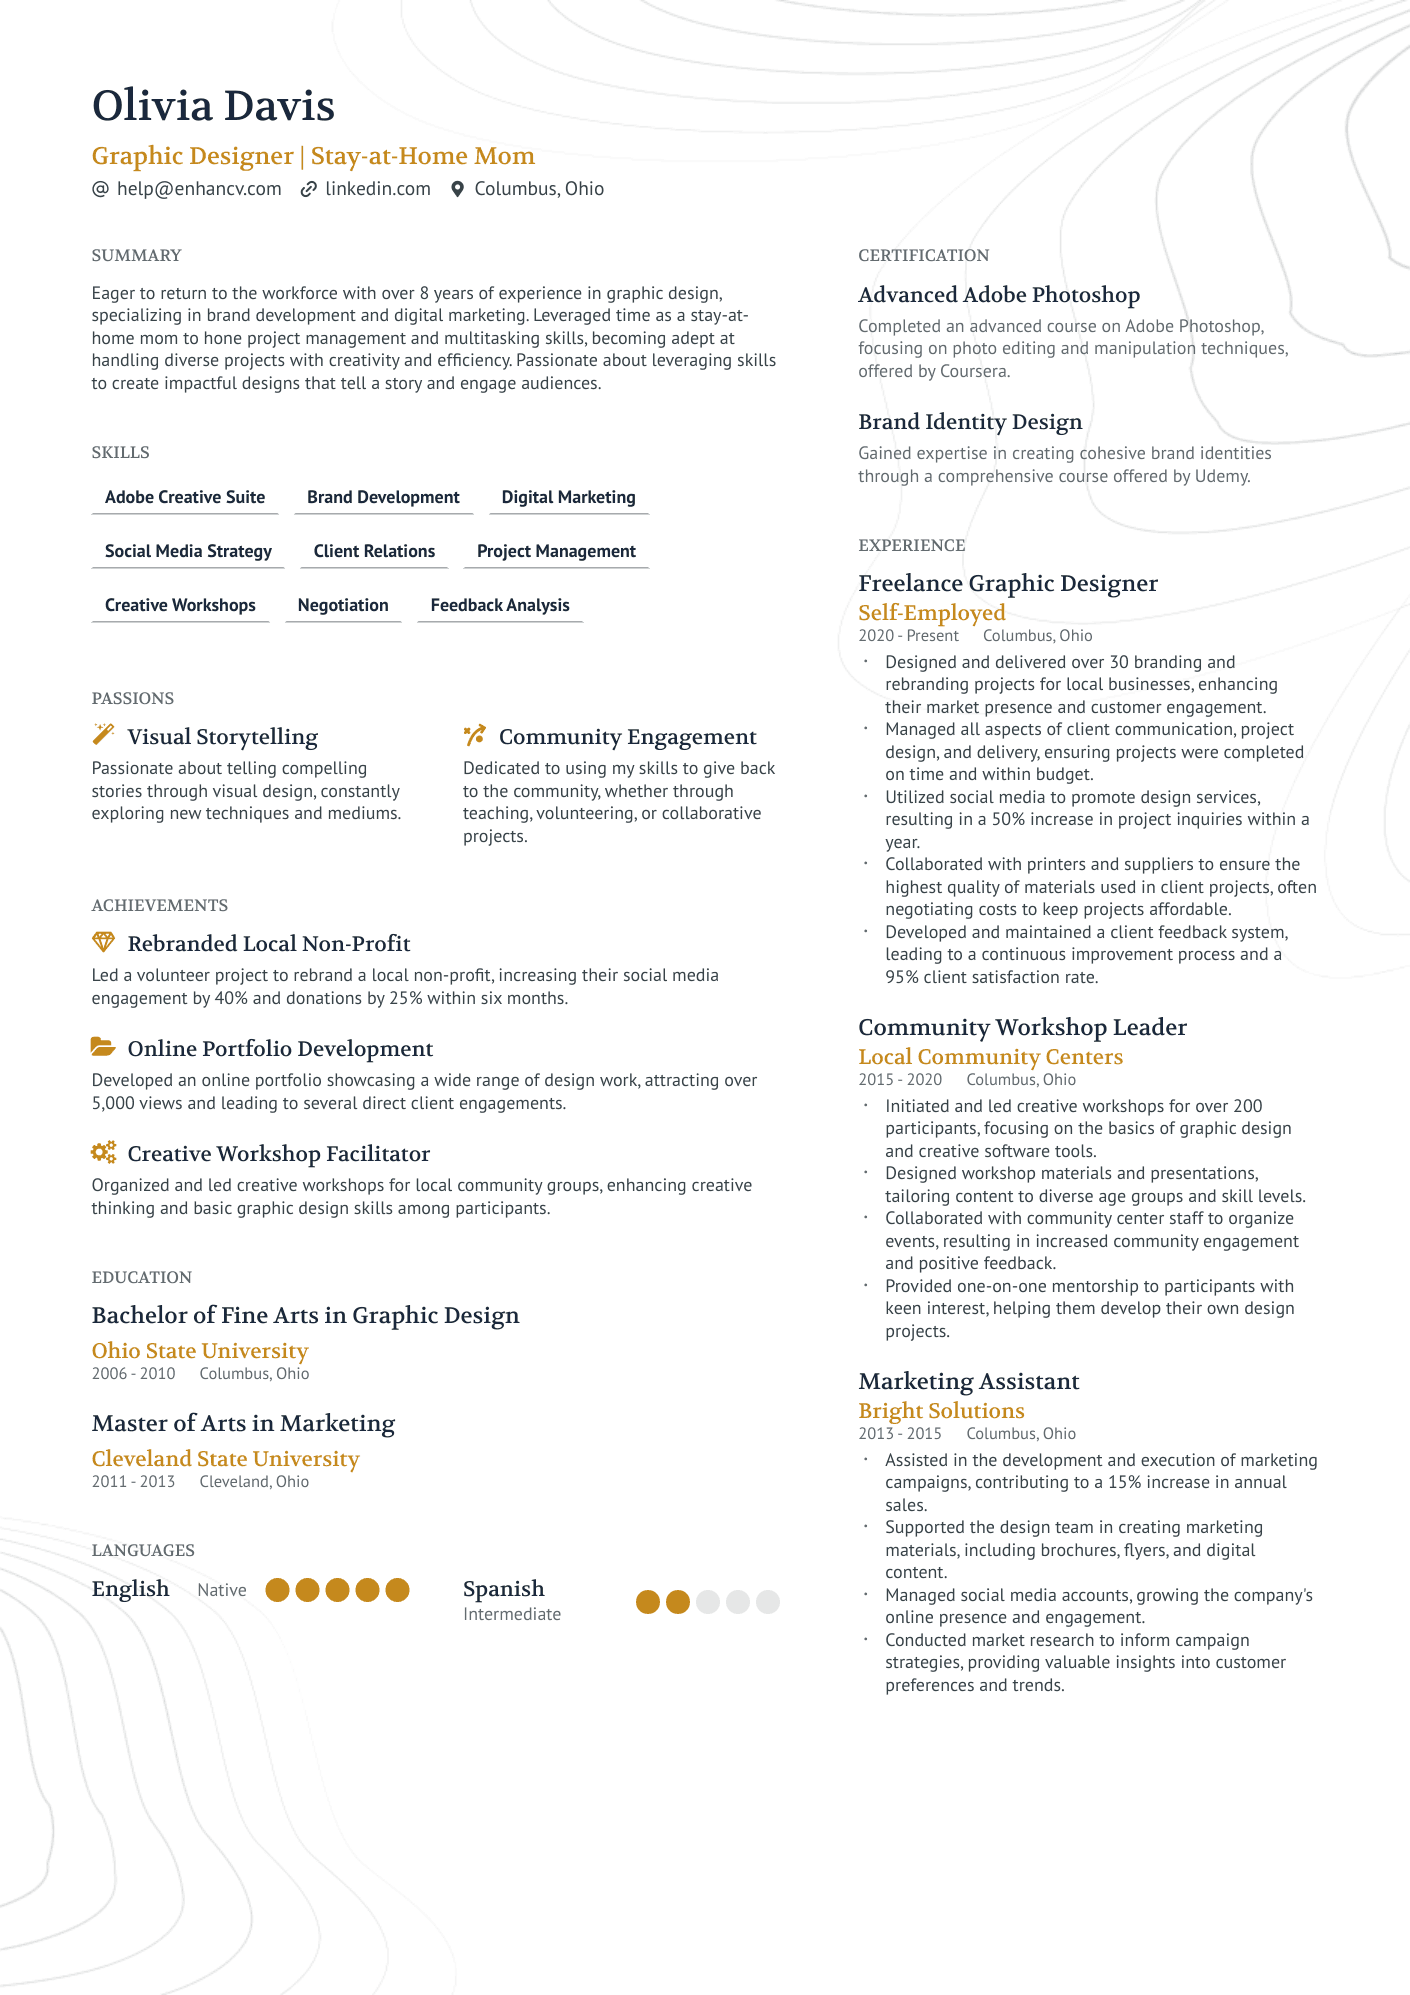 Graphic Designer | Stay at Home Mom resume example